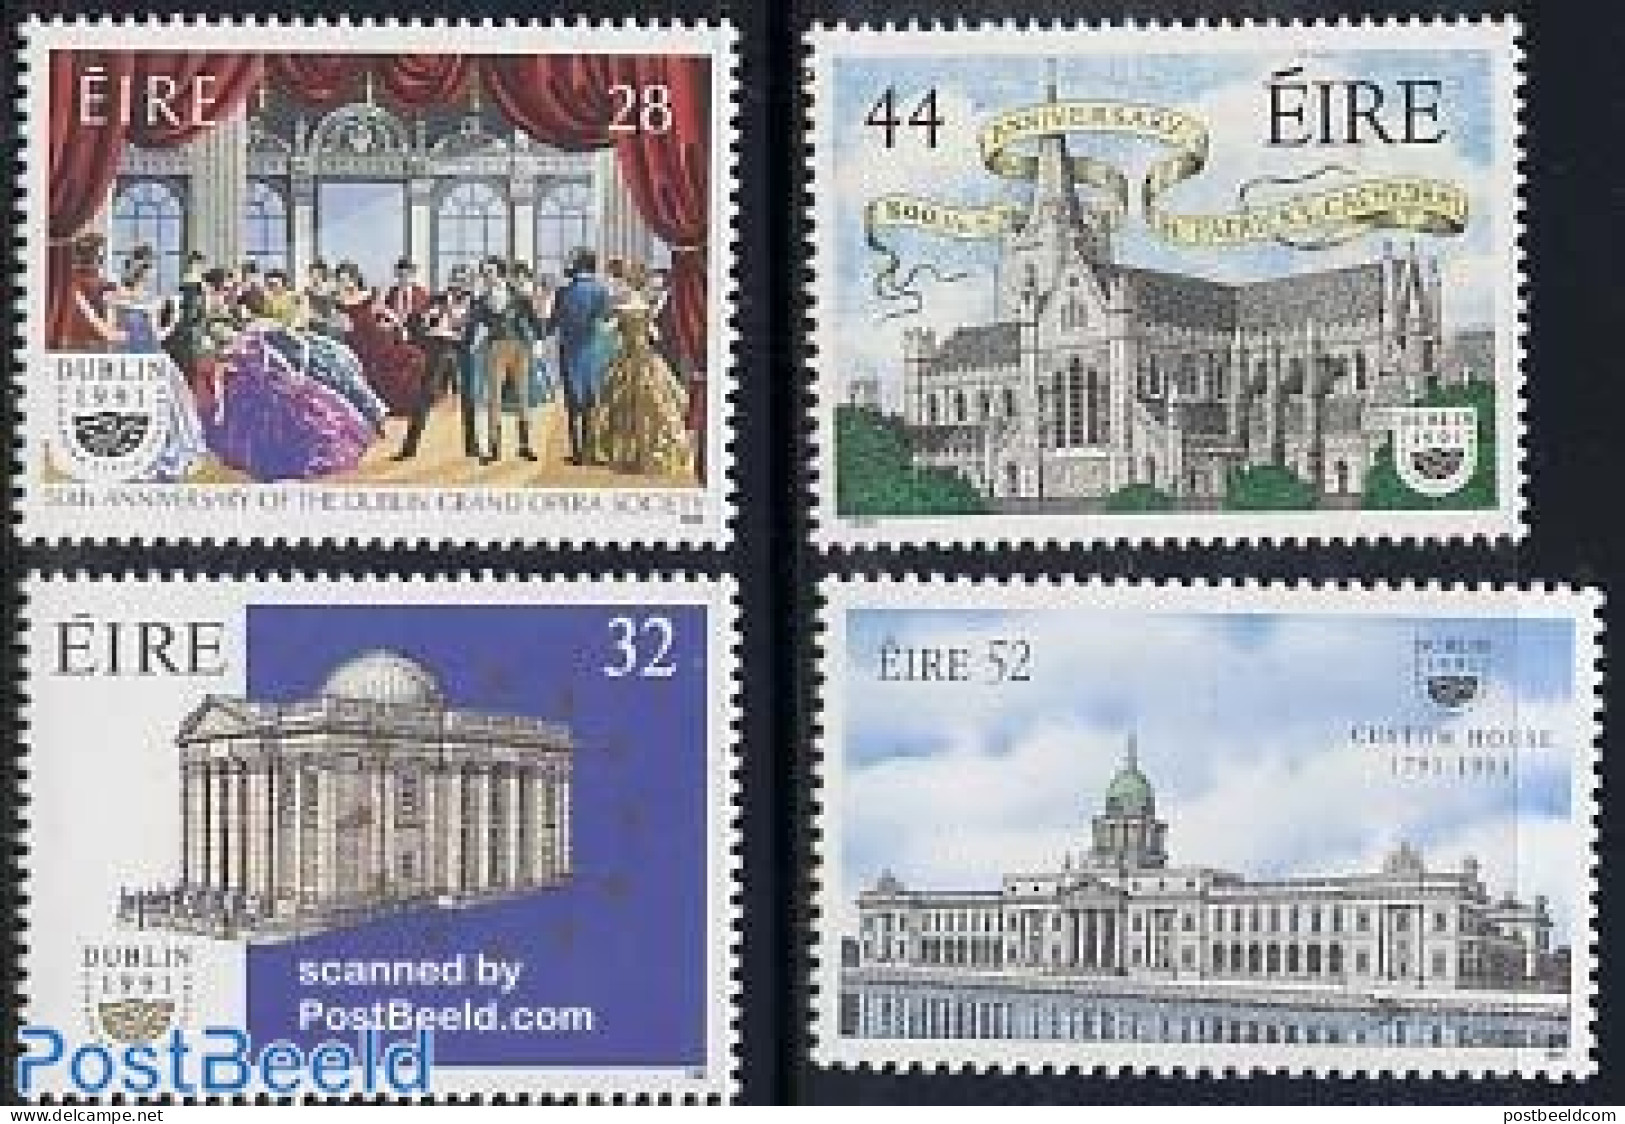 Ireland 1991 Dublin Cultural Capital Europe 4v, Mint NH, History - Performance Art - Religion - Europa Hang-on Issues .. - Ungebraucht